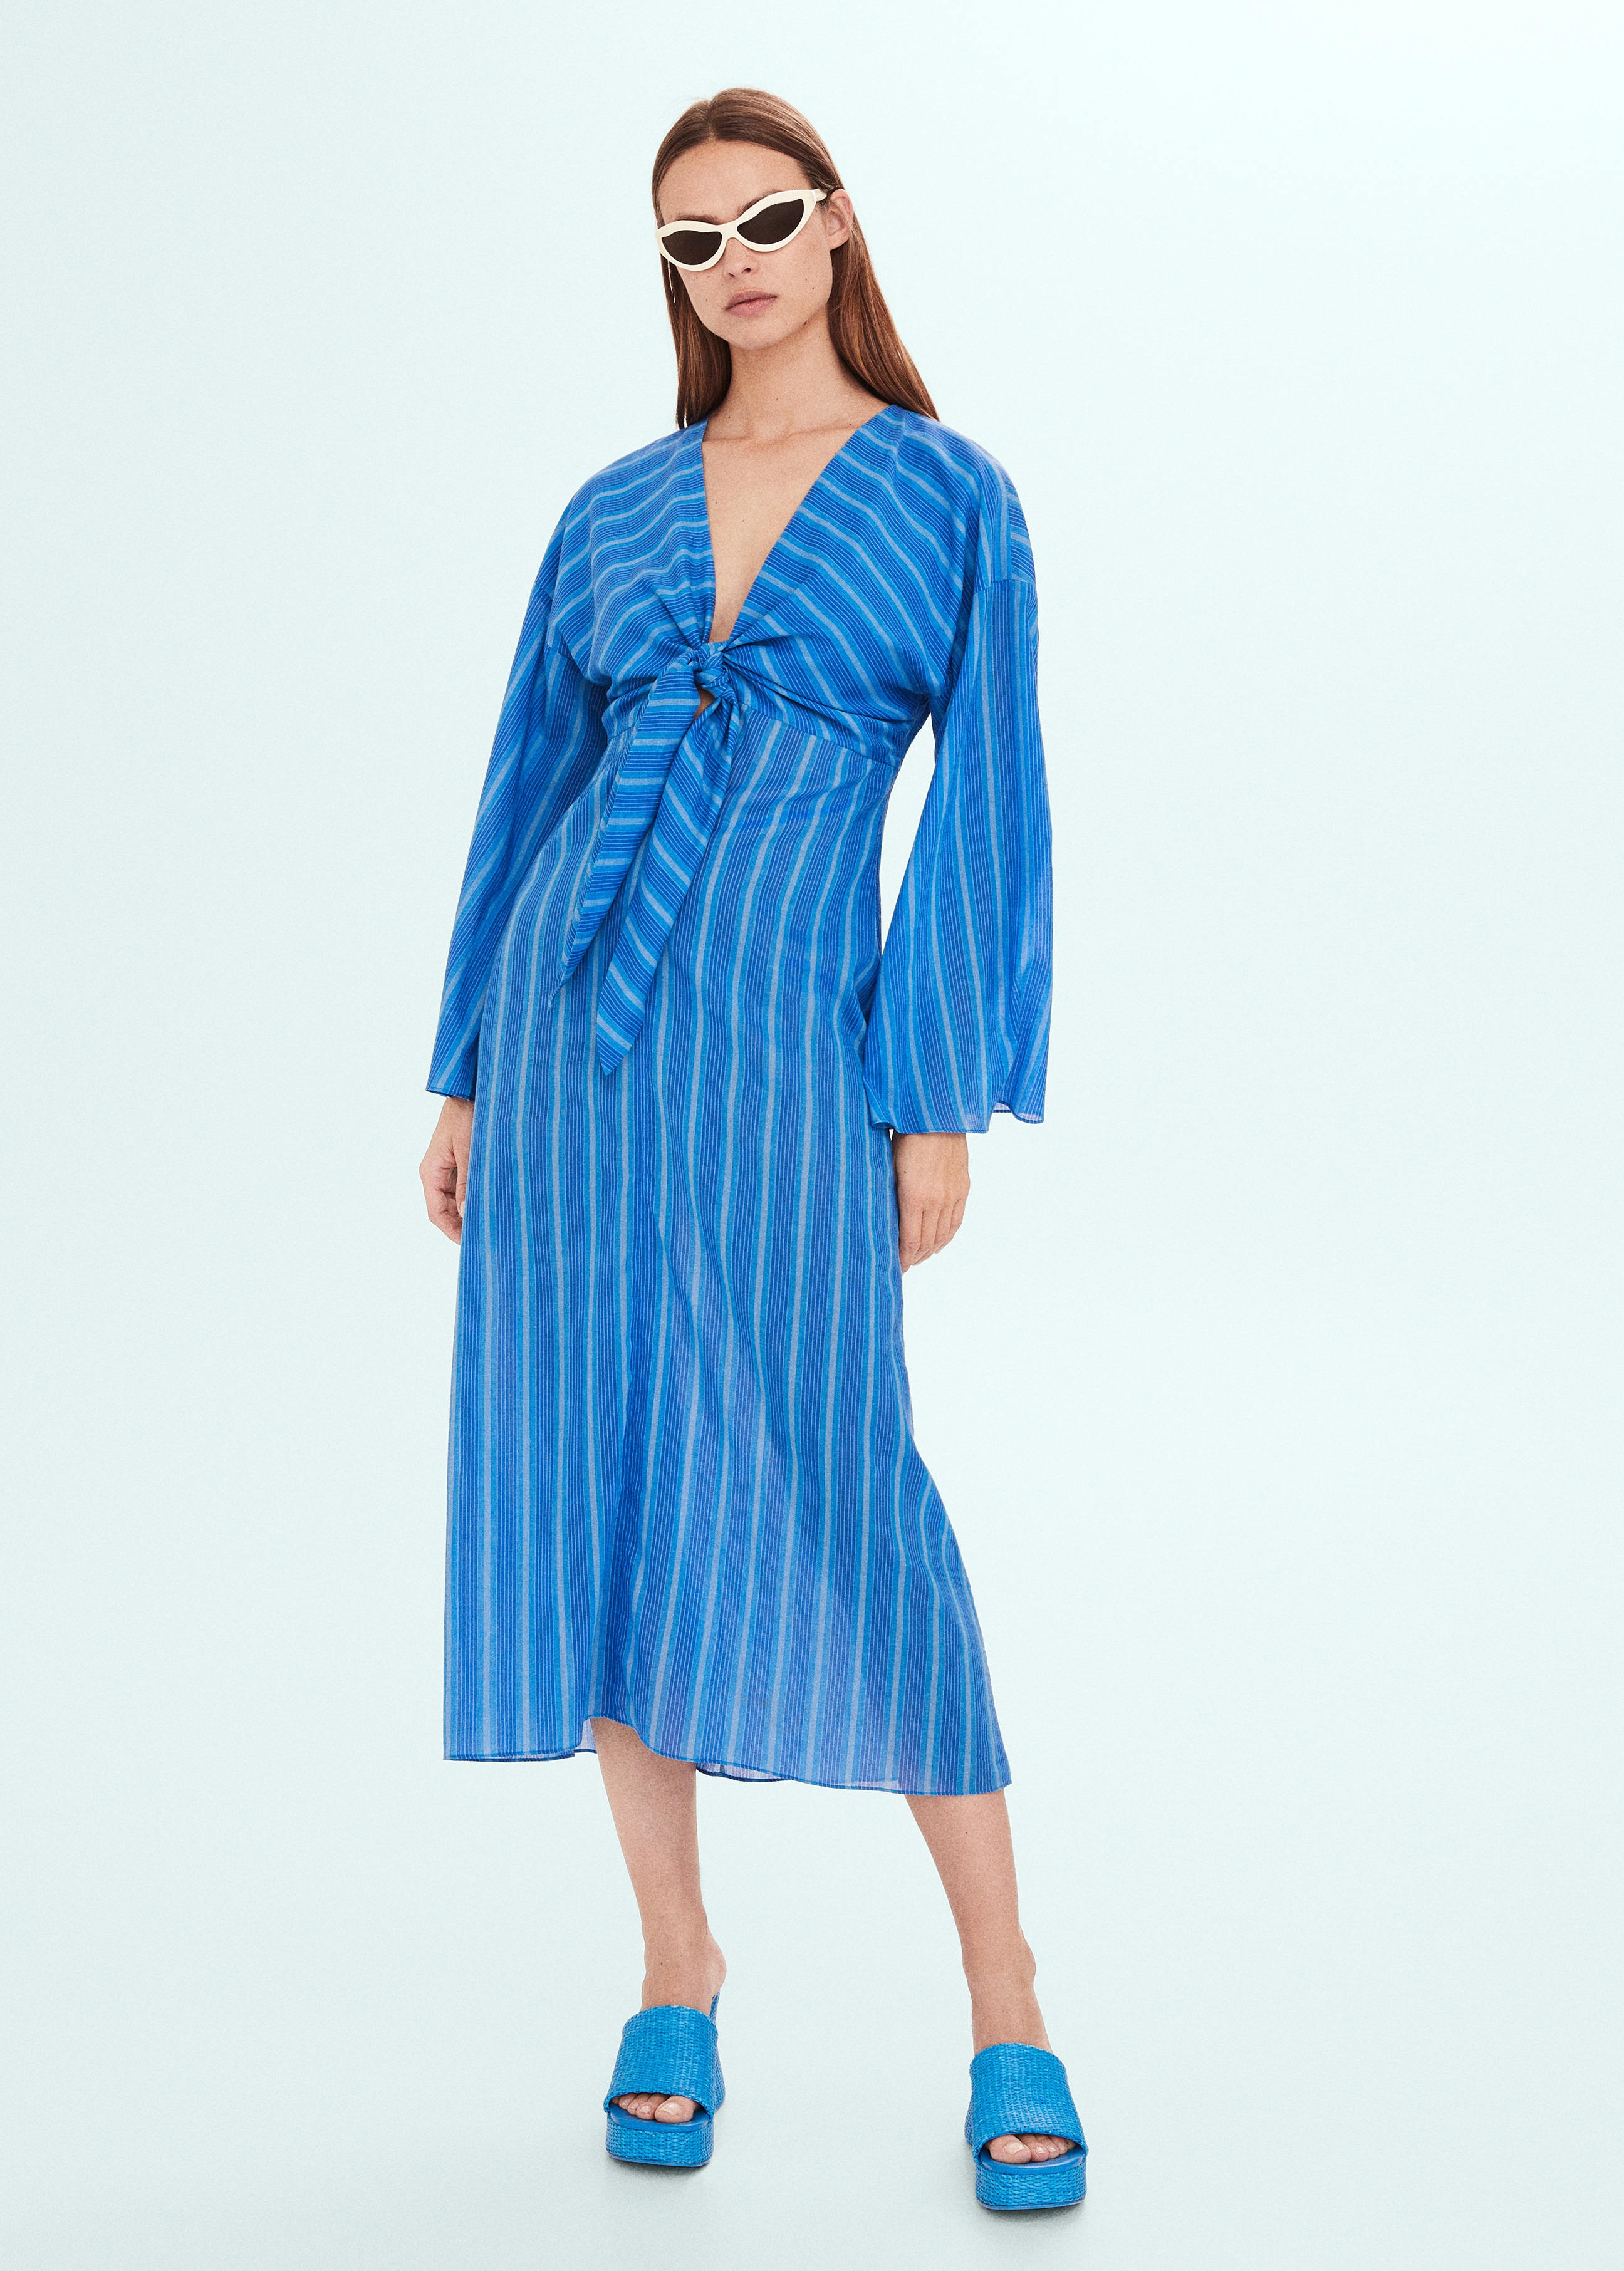 Striped dress with knot detail - Details of the article 2